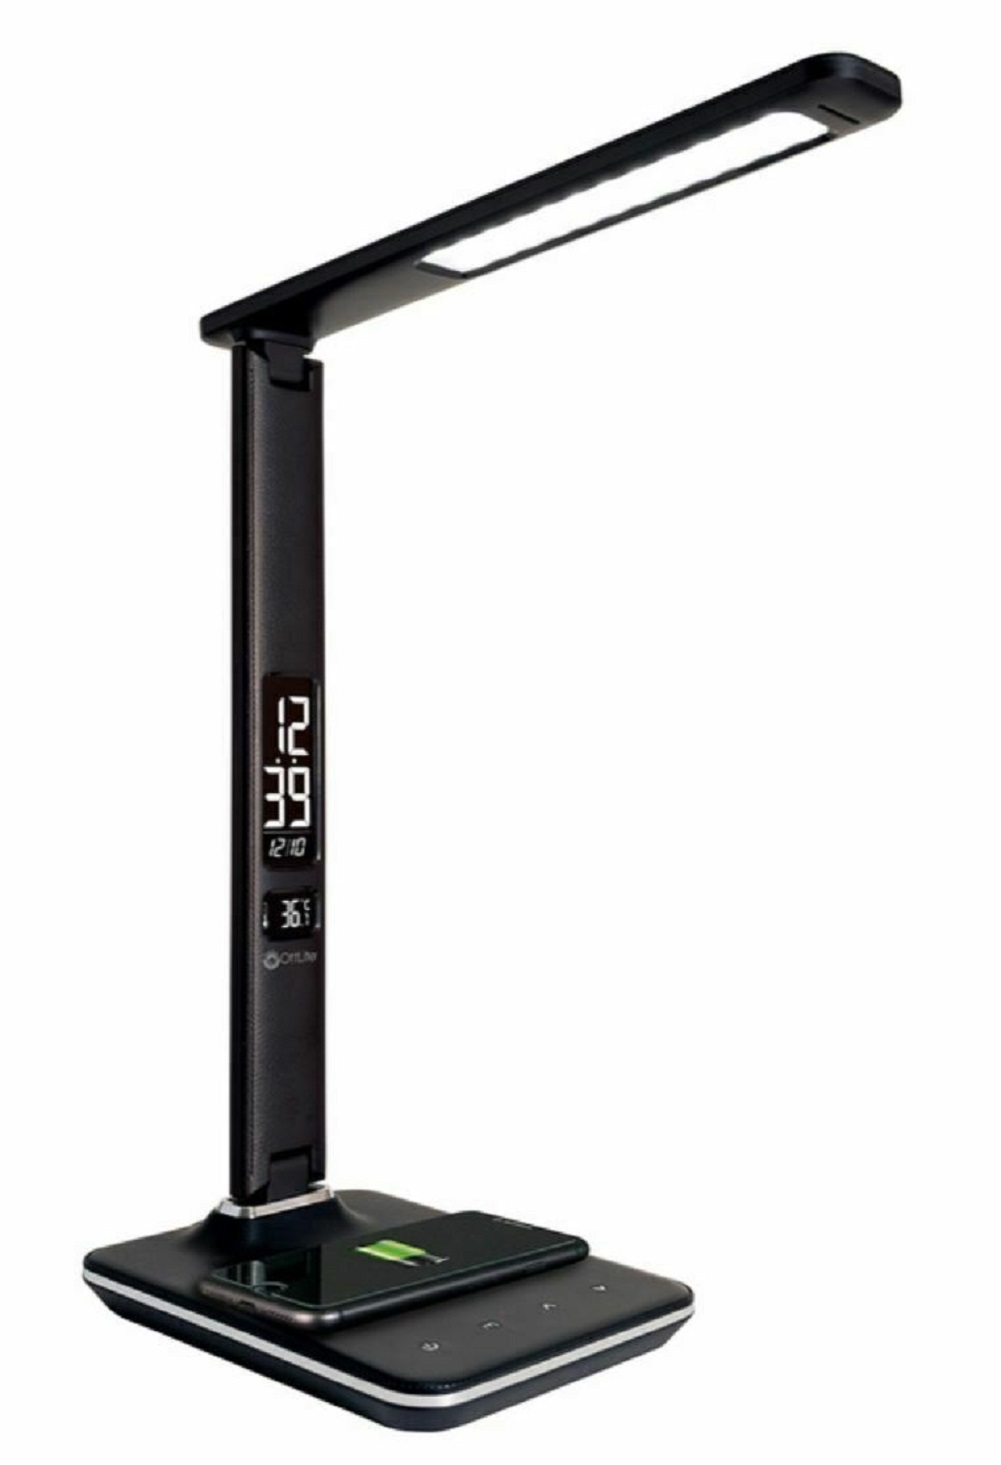 NEW Black Executive LED Desk Lamp Time Date Wireless Qi USB Charging Temperature